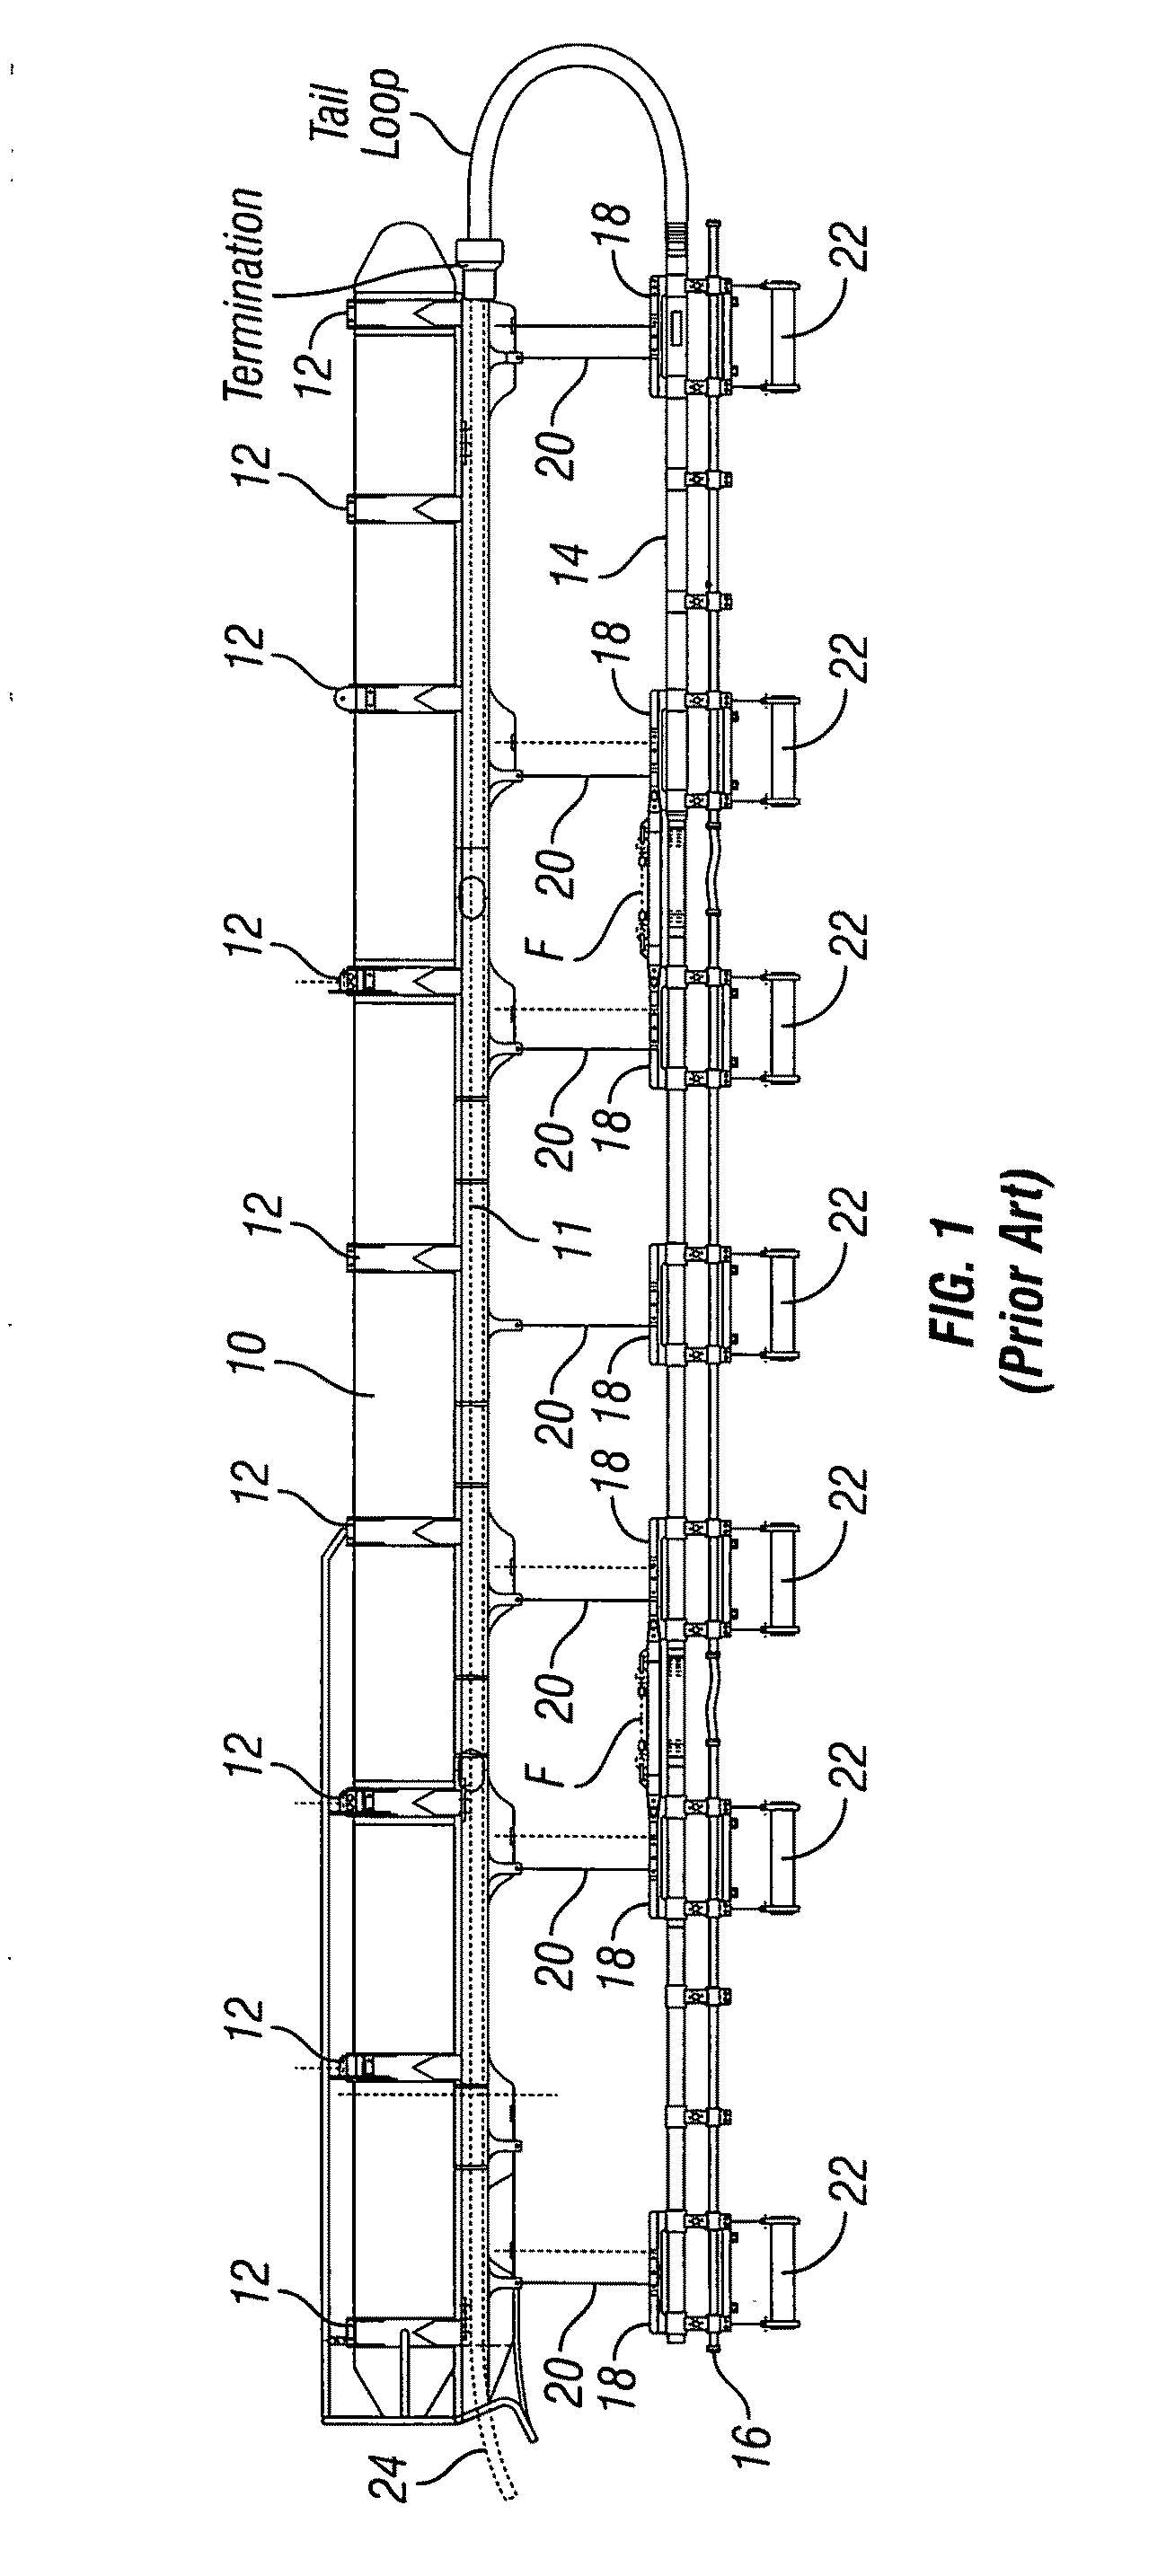 Coaxial support structure for towed marine seismic source arrays